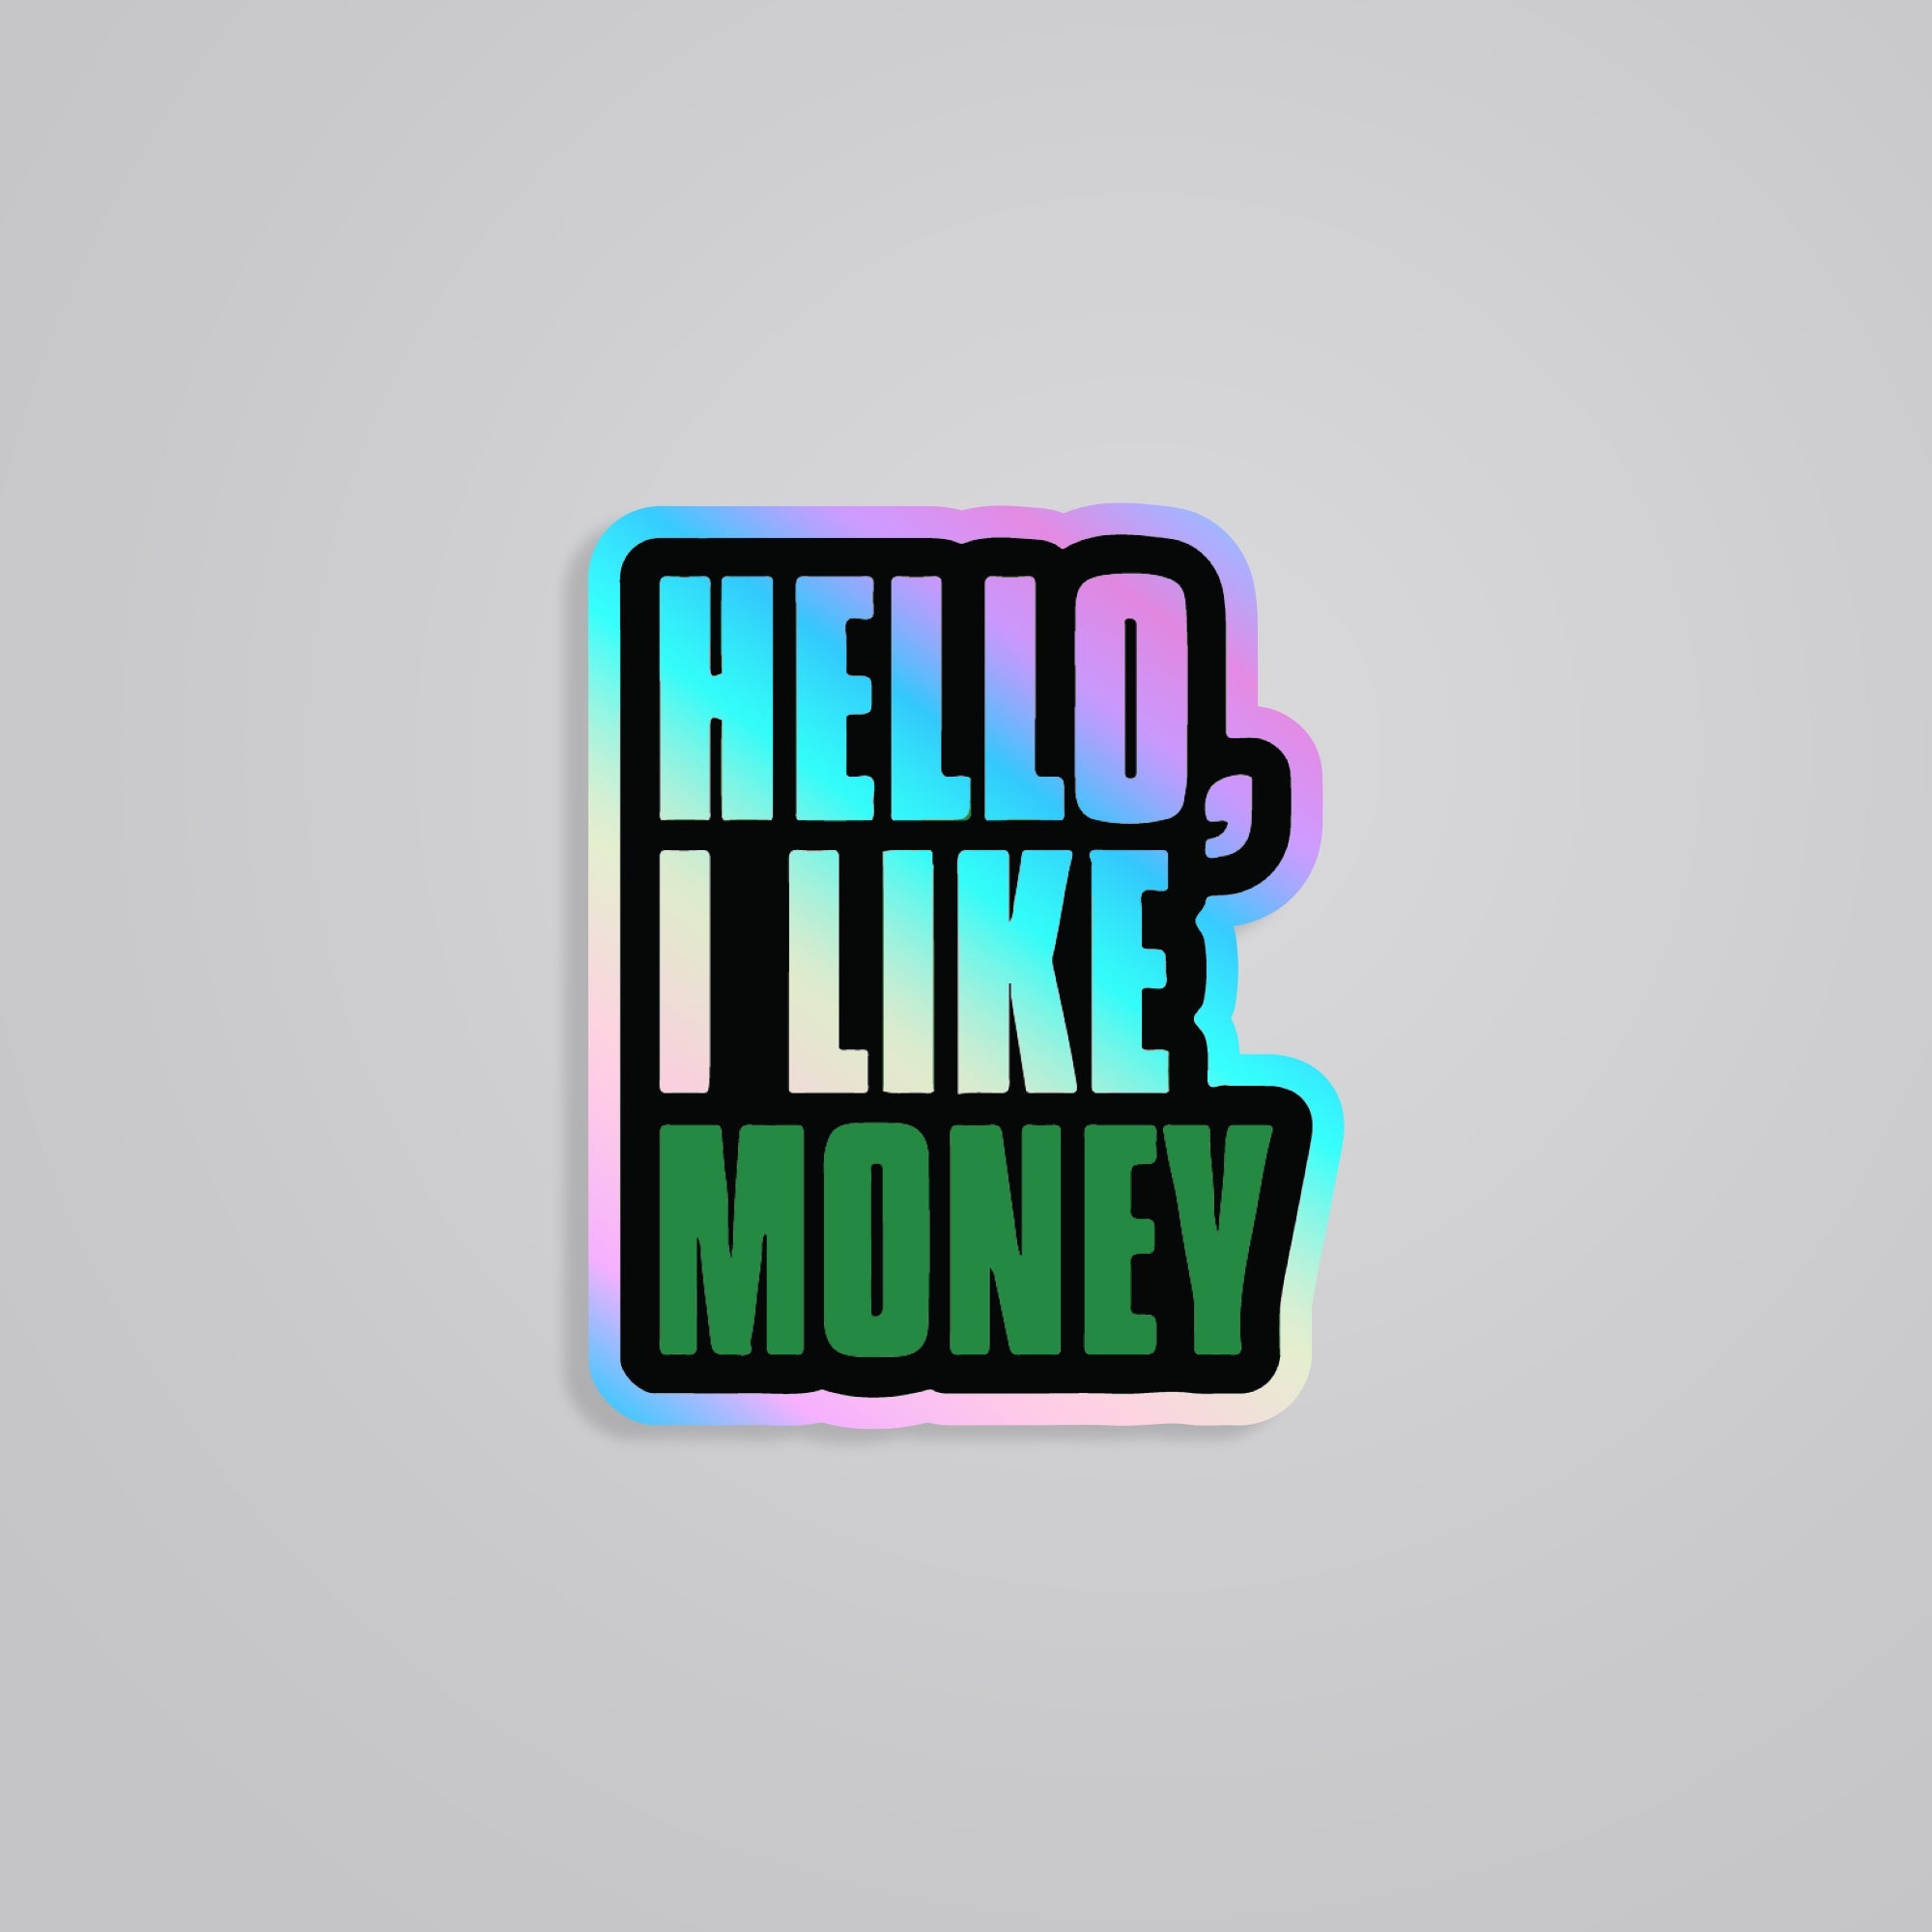 Fomo Store Holographic Stickers Witty Hello, I Like Money